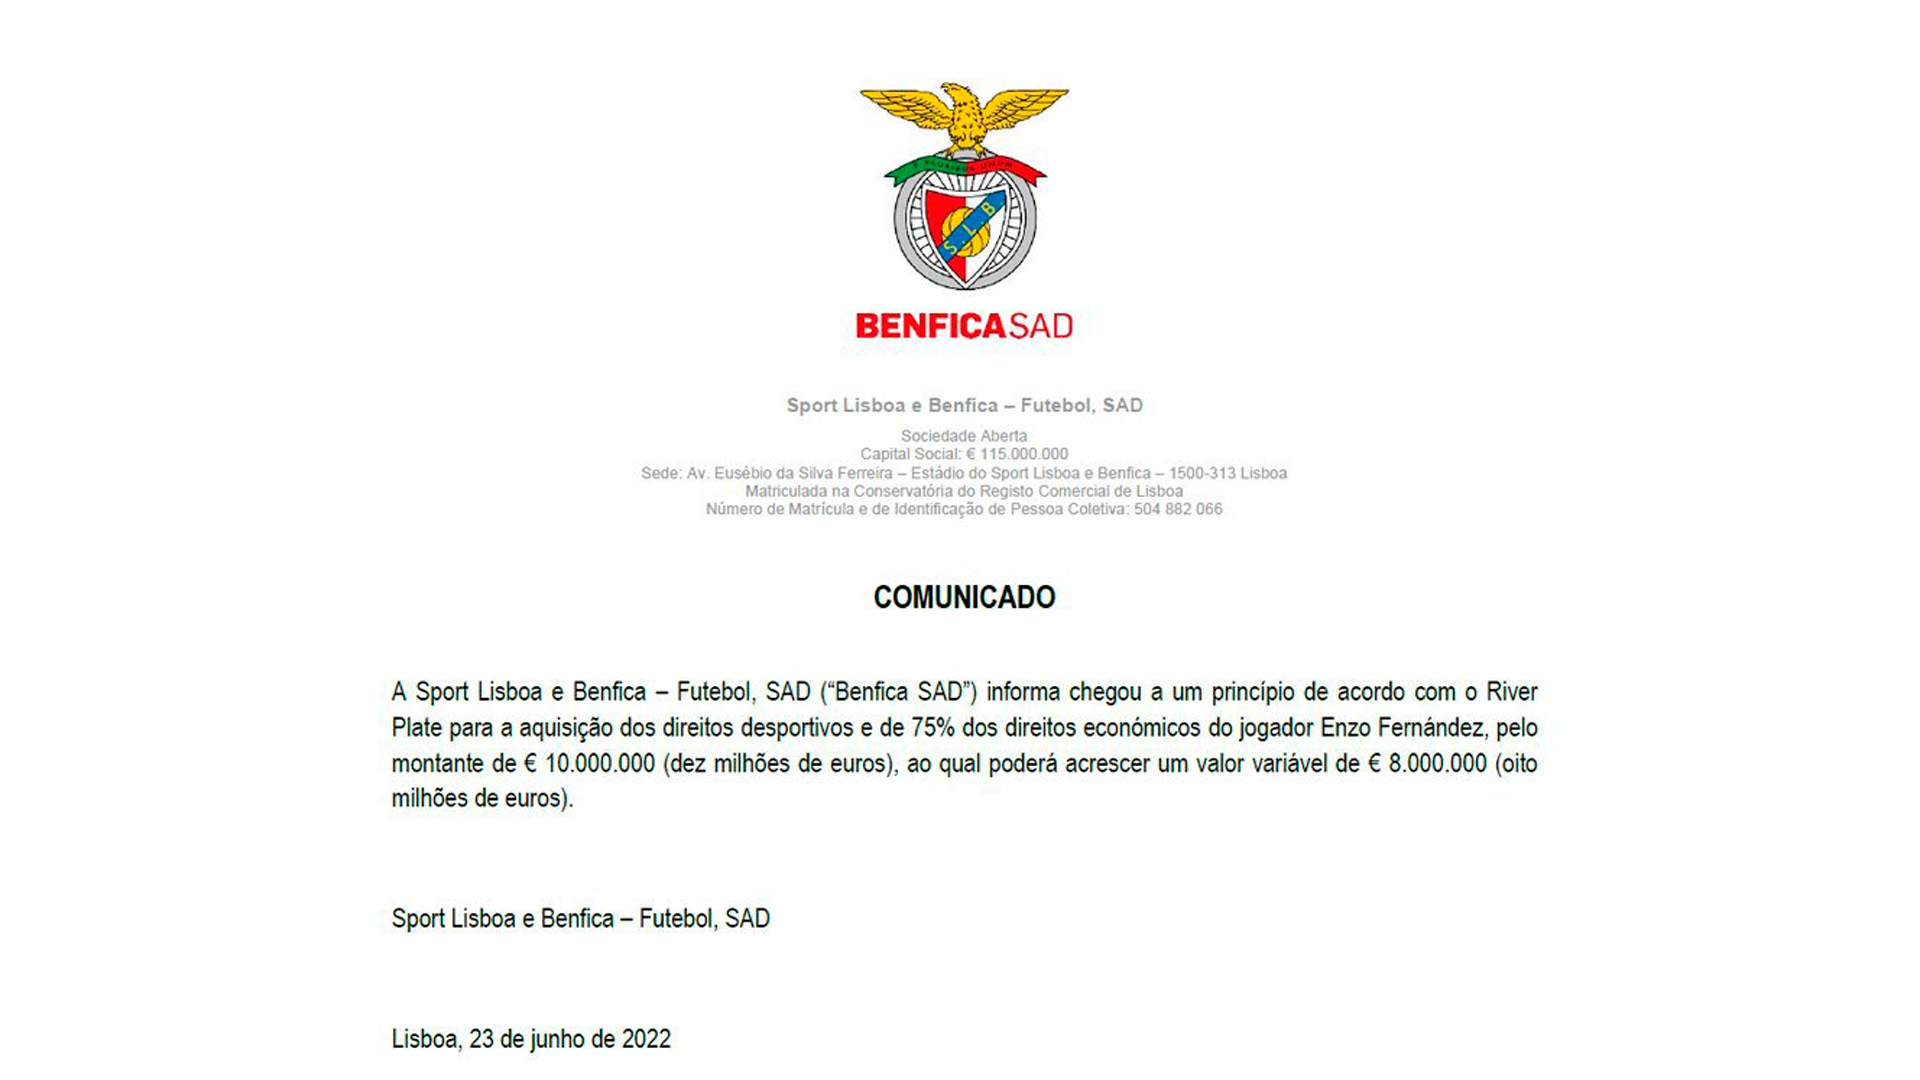 Benfica's statement on the principle of agreement with River Plate by Enzo Fernández